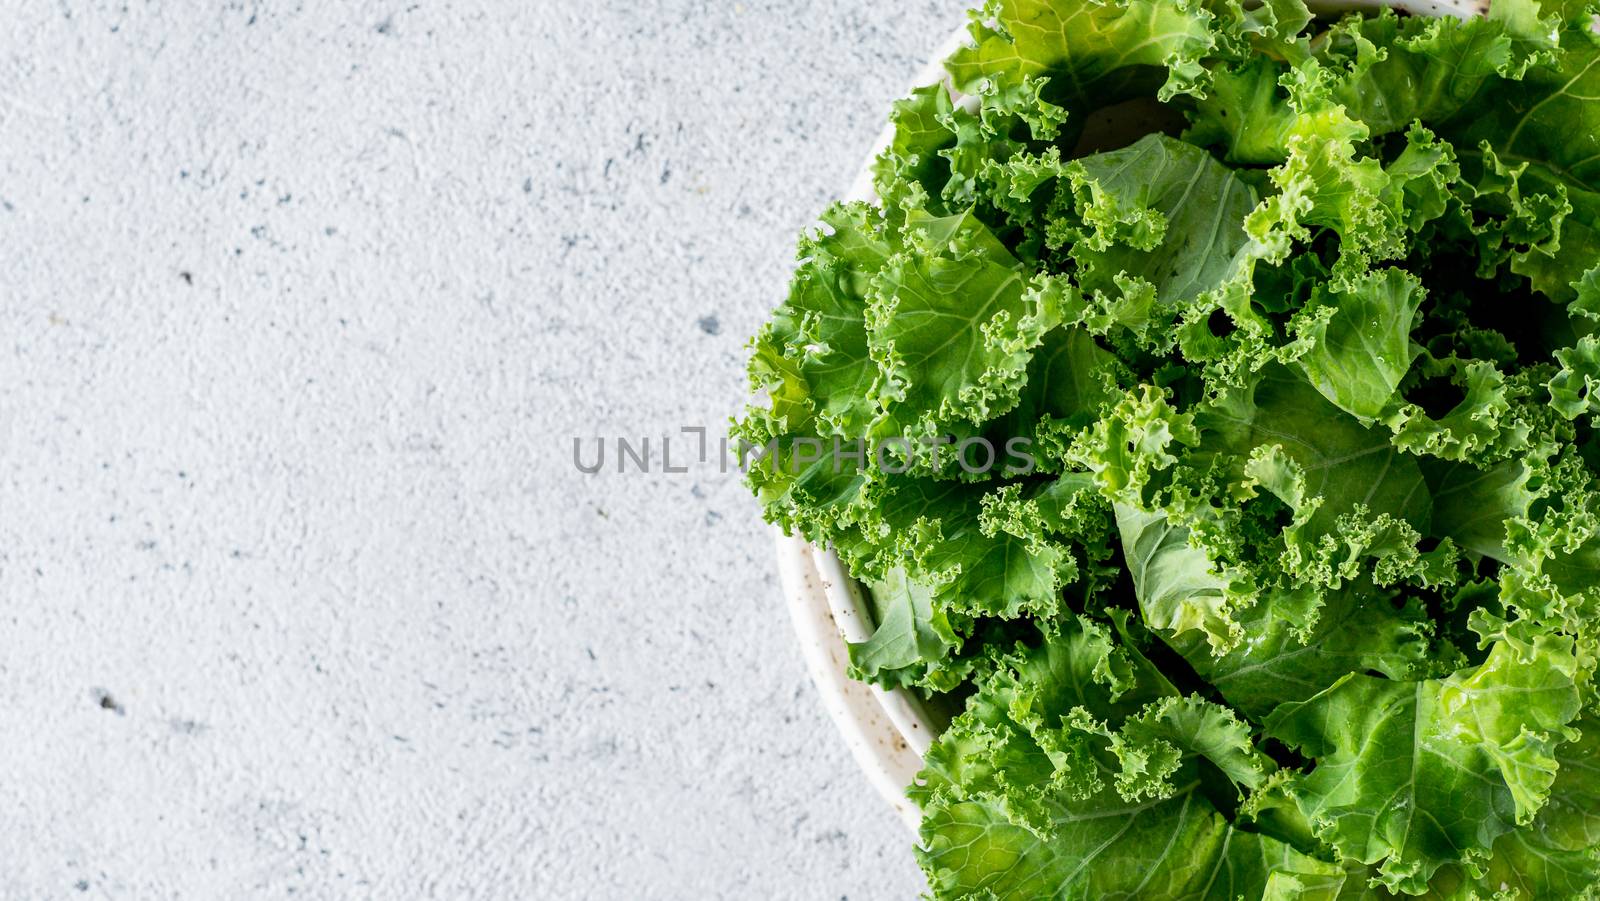 Kale close up. Green vegetable leaves, top view in white craft bowl over gray cement background. Healthy eating, vegetarian food,dieting concept. Top view or flat lay. Copy space. Health kale benefits